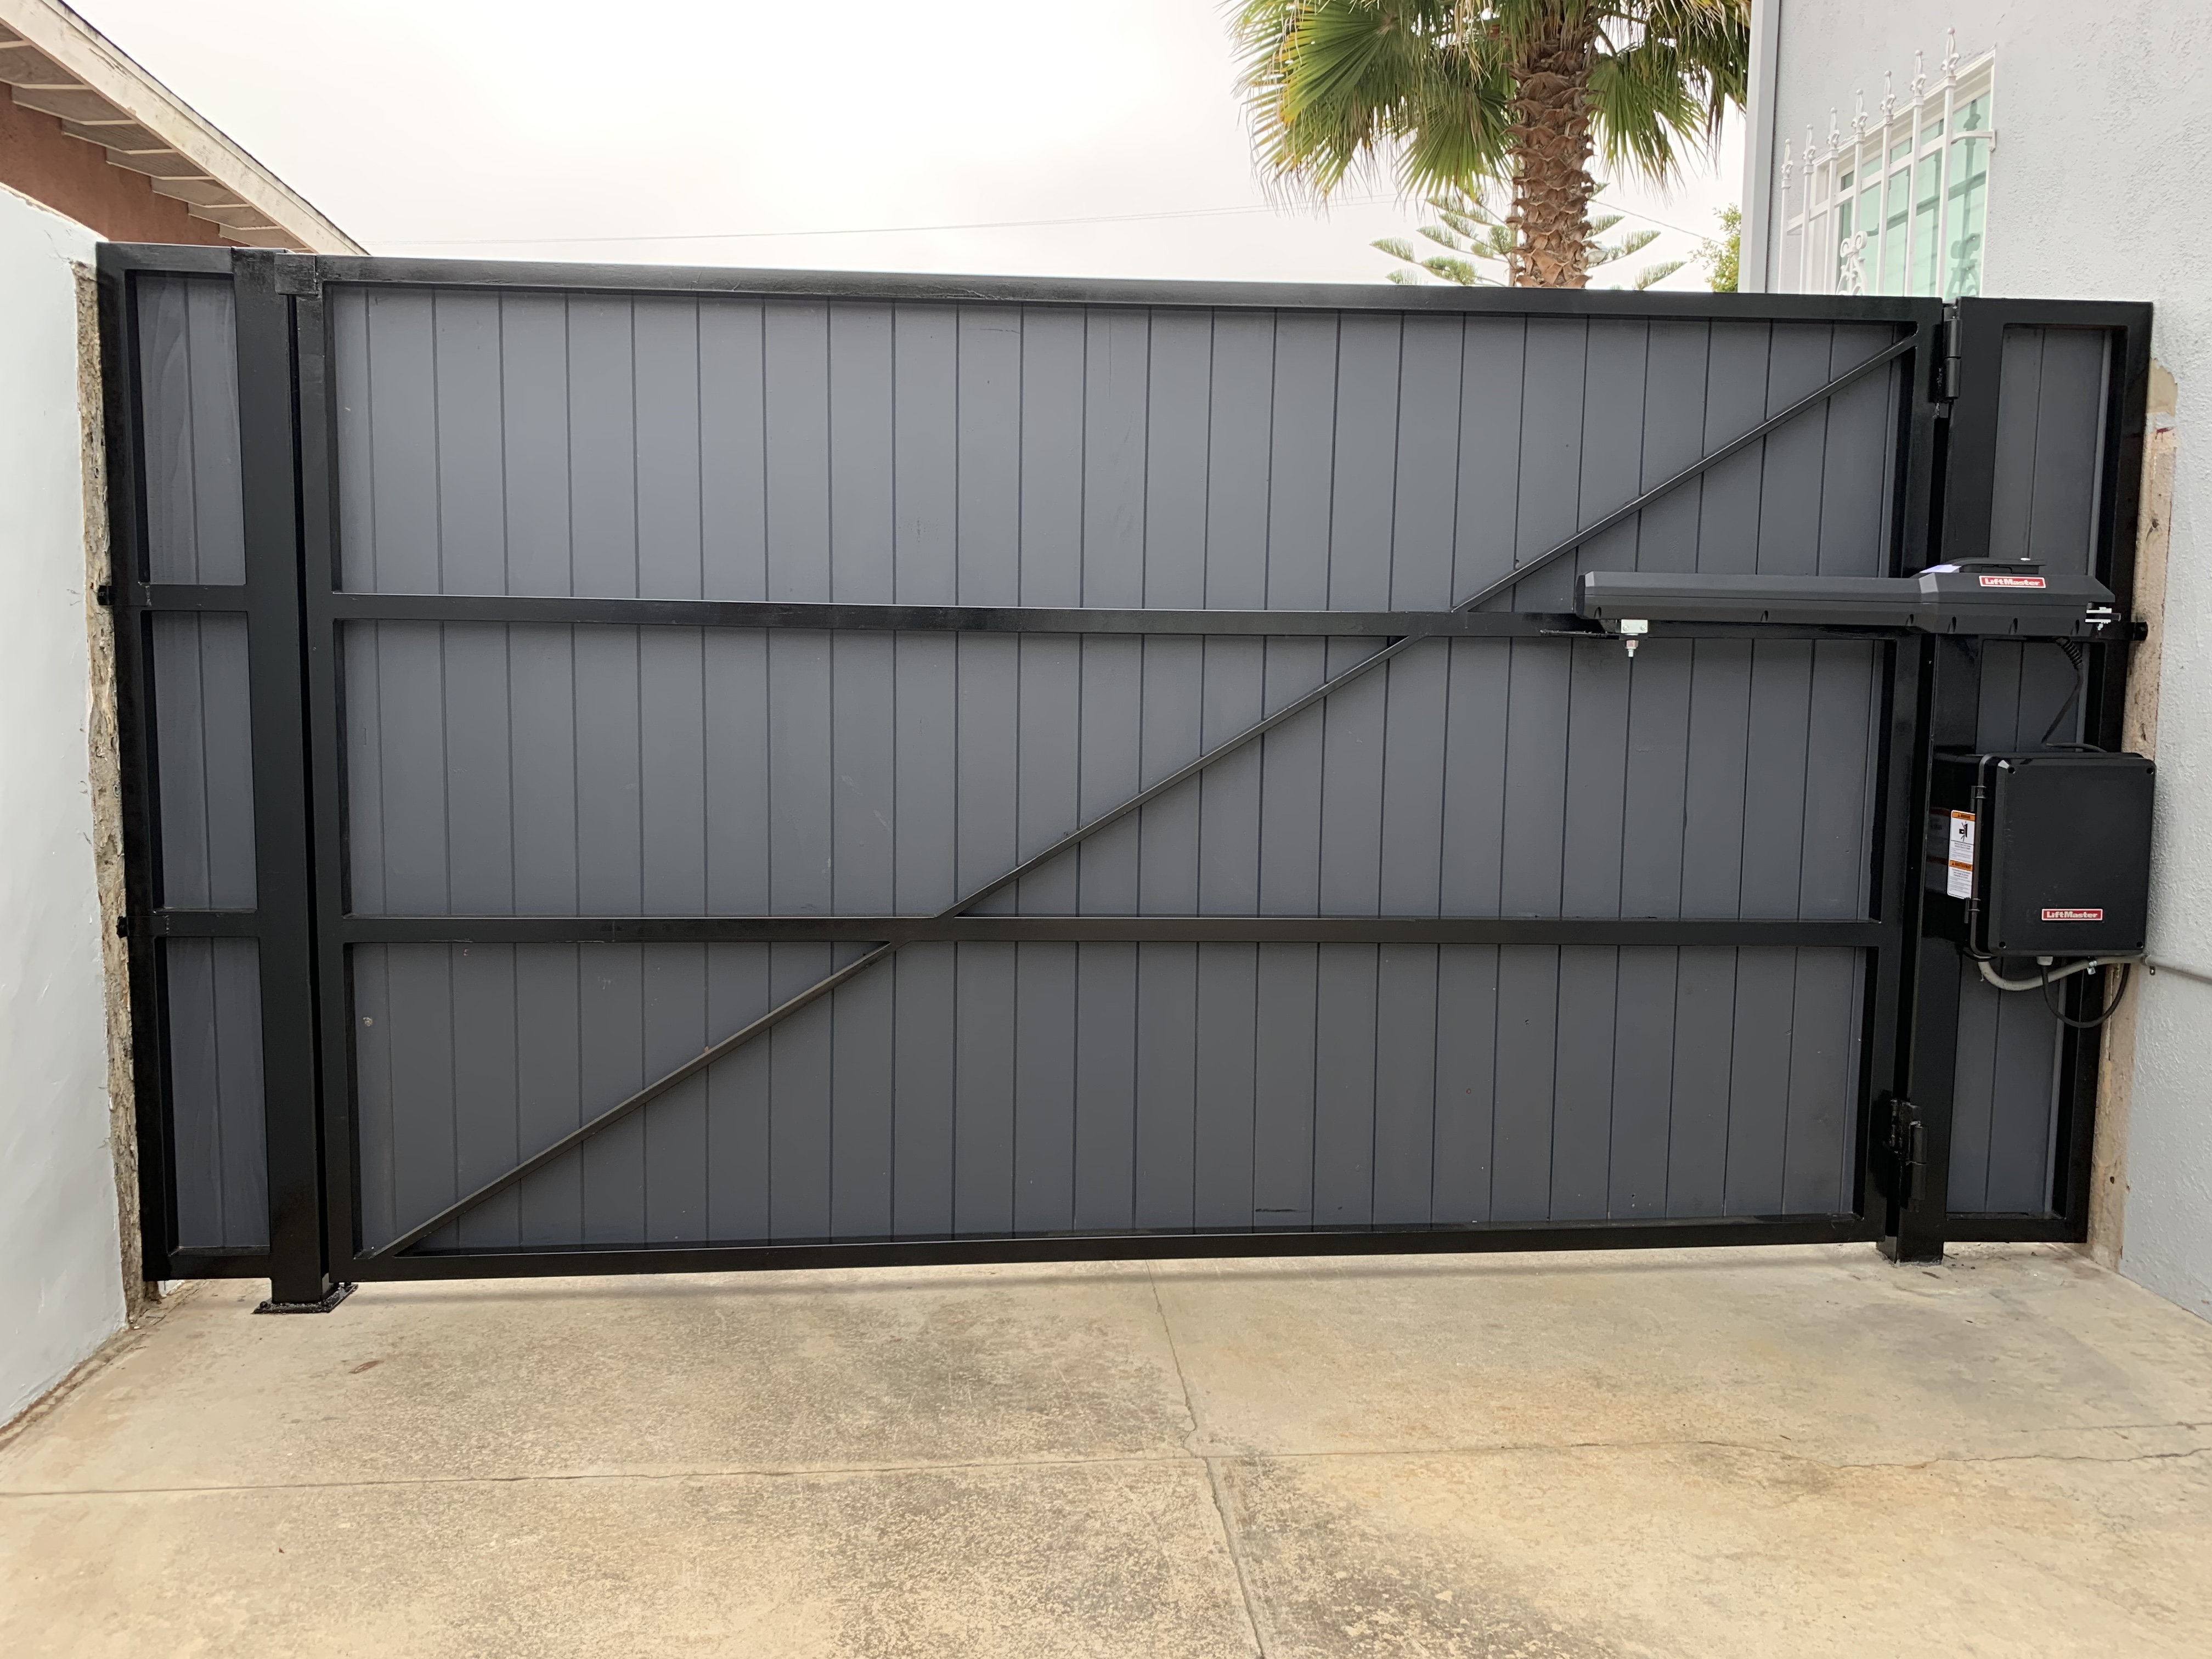 Culver City, Los Angeles Steel frame automatic motorized driveway gate tongue and groove redwood